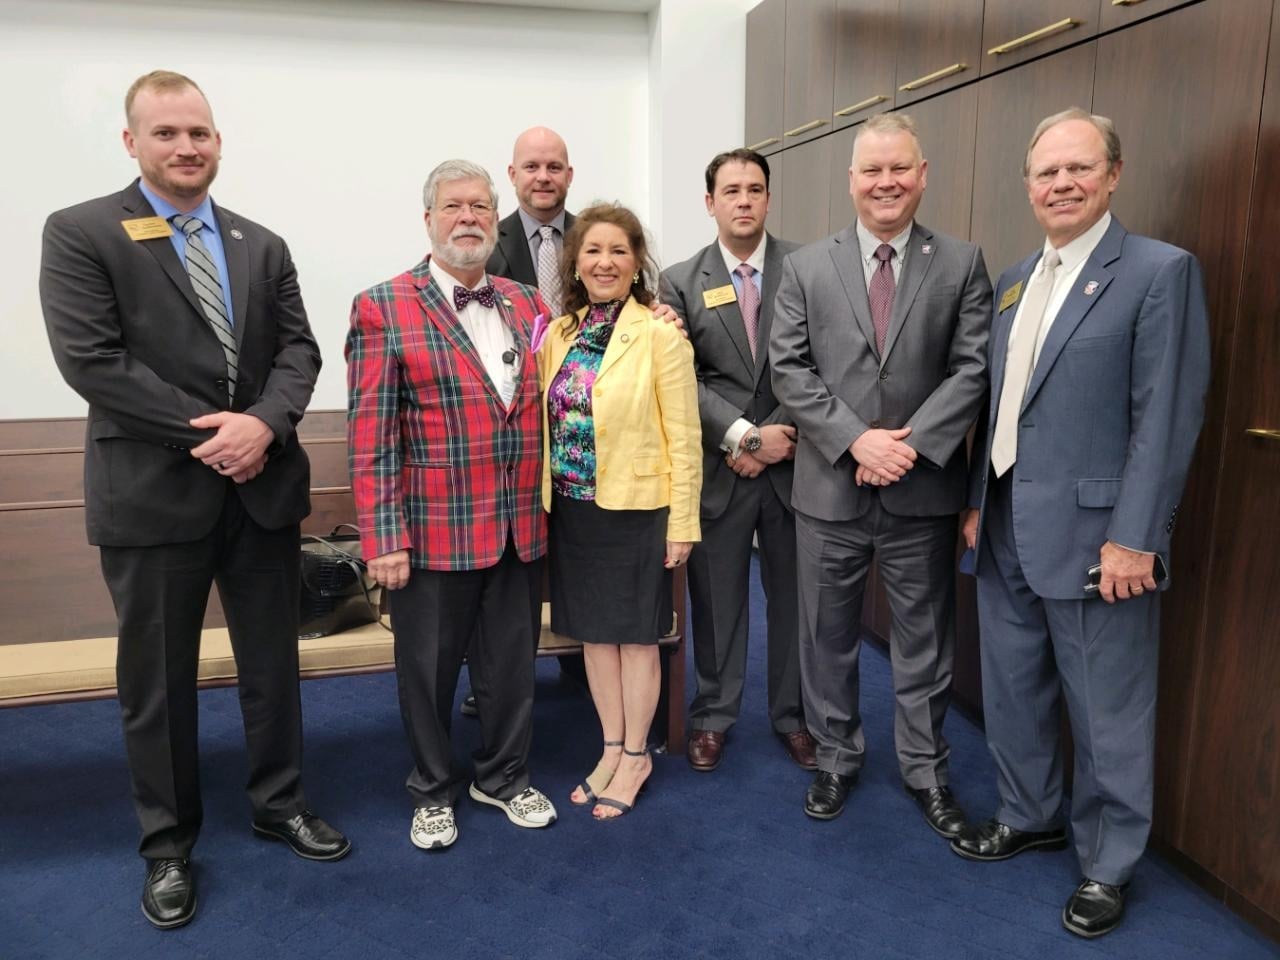 PBA Delegation with Bradly Evans, Rep. Mike Clampitt, and Donna White after the Committee Hearing